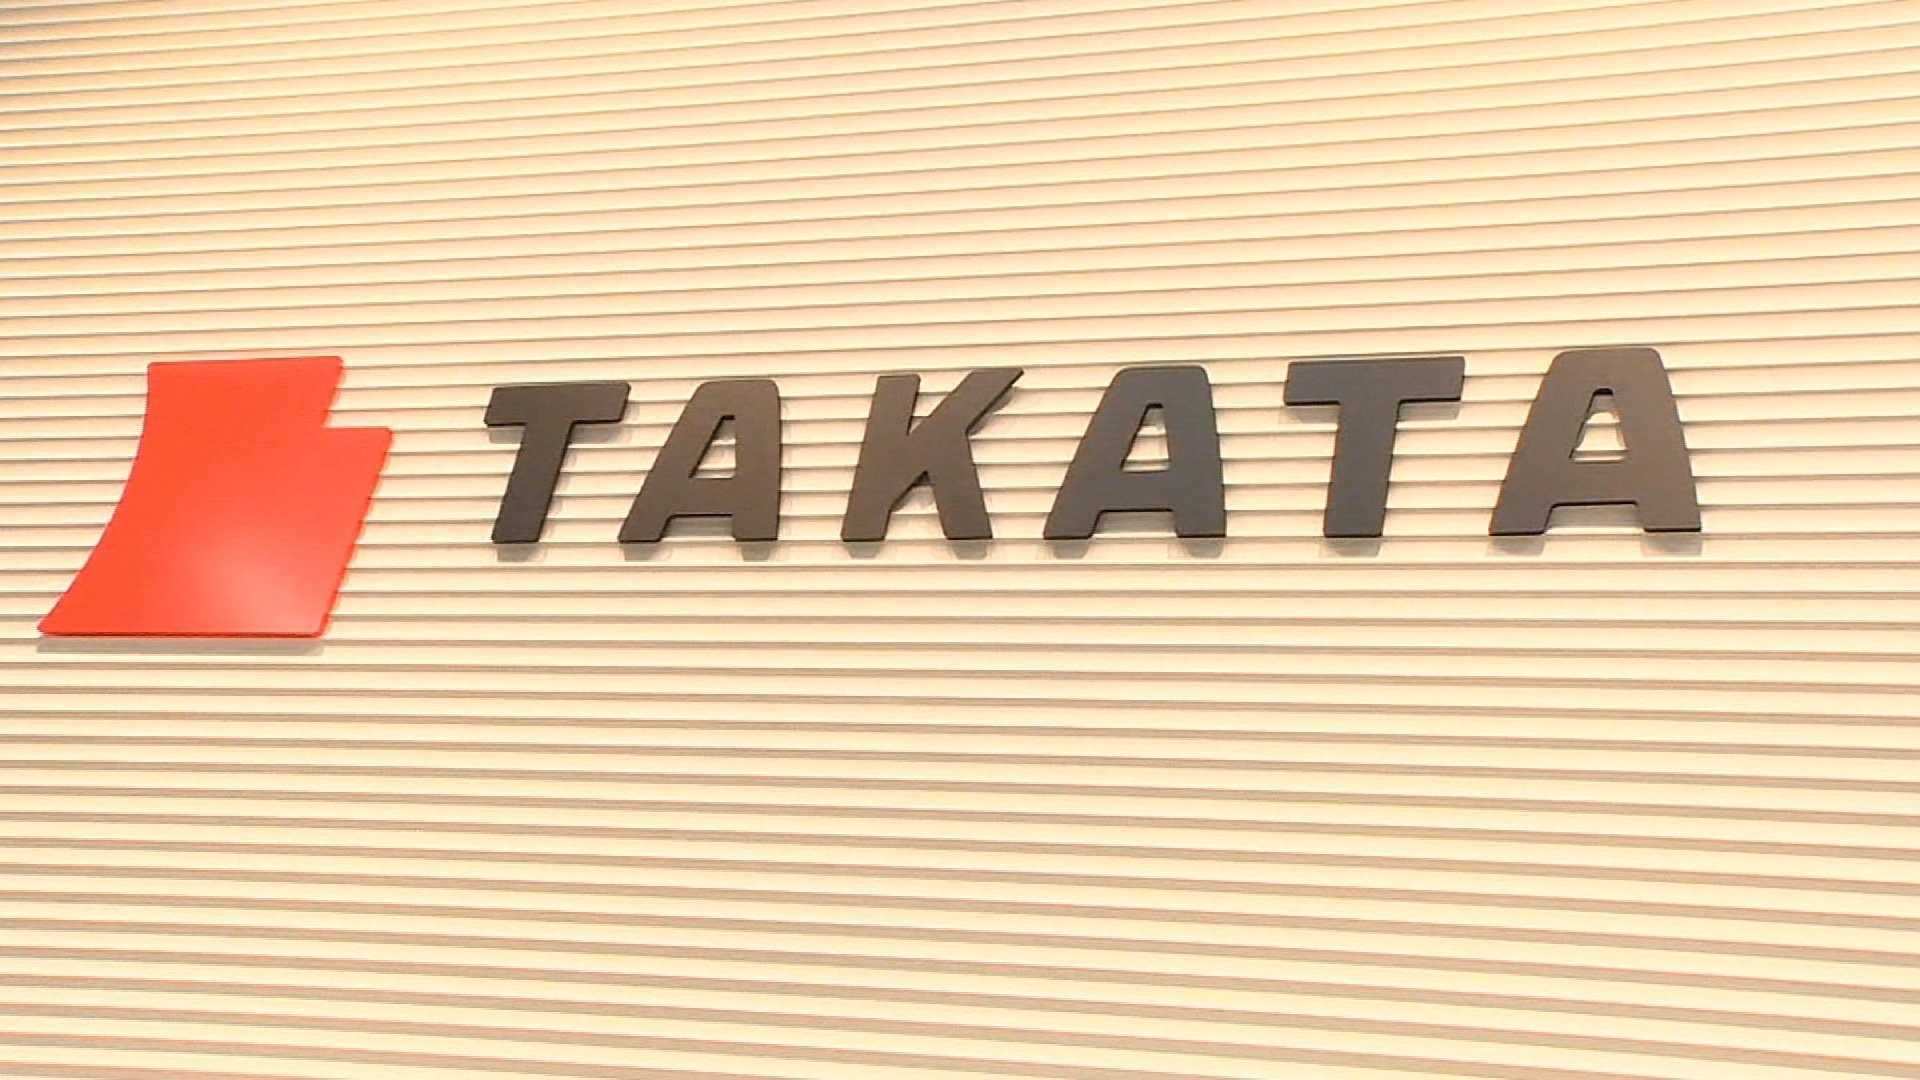 Final deal reached for sale of air bag maker Takata's assets